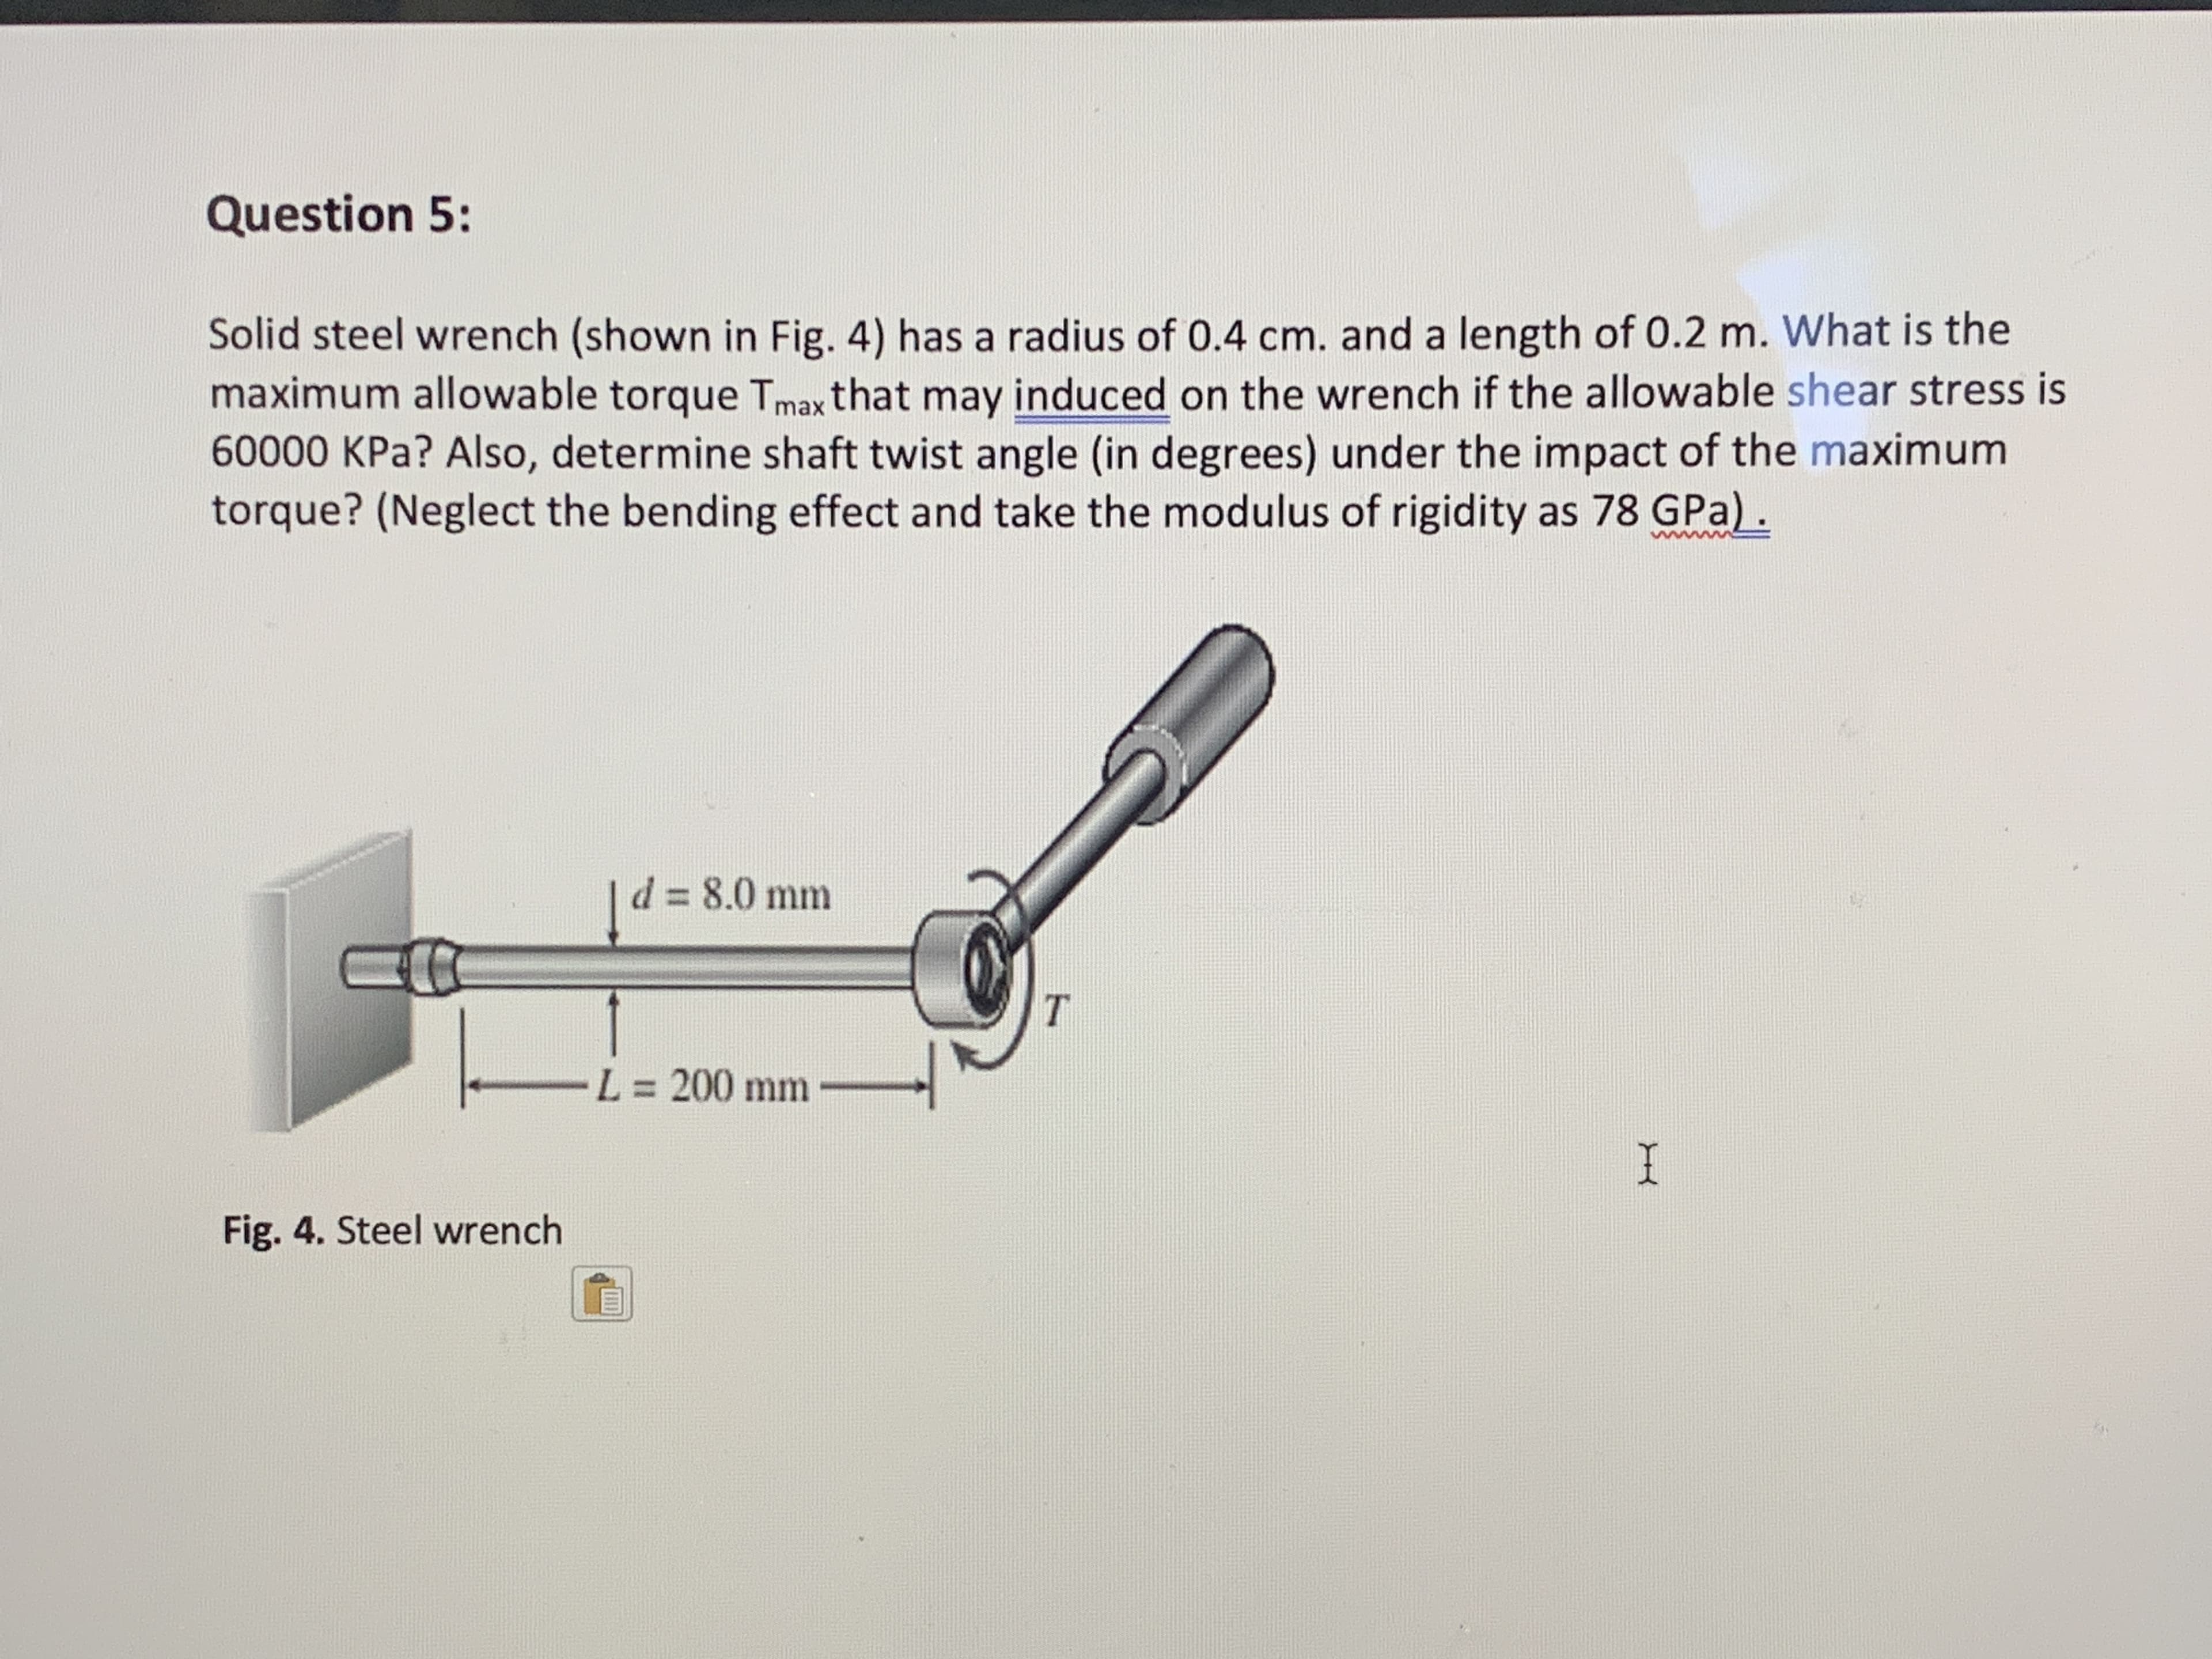 Solid steel wrench (shown in Fig. 4) has a radius of 0.4 cm. and a length of 0.2 m. What is the
maximum allowable torque Tmax that may induced on the wrench if the allowable shear stress is
60000 KPa? Also, determine shaft twist angle (in degrees) under the impact of the maximum
torque? (Neglect the bending effect and take the modulus of rigidity as 78 GPa) .
